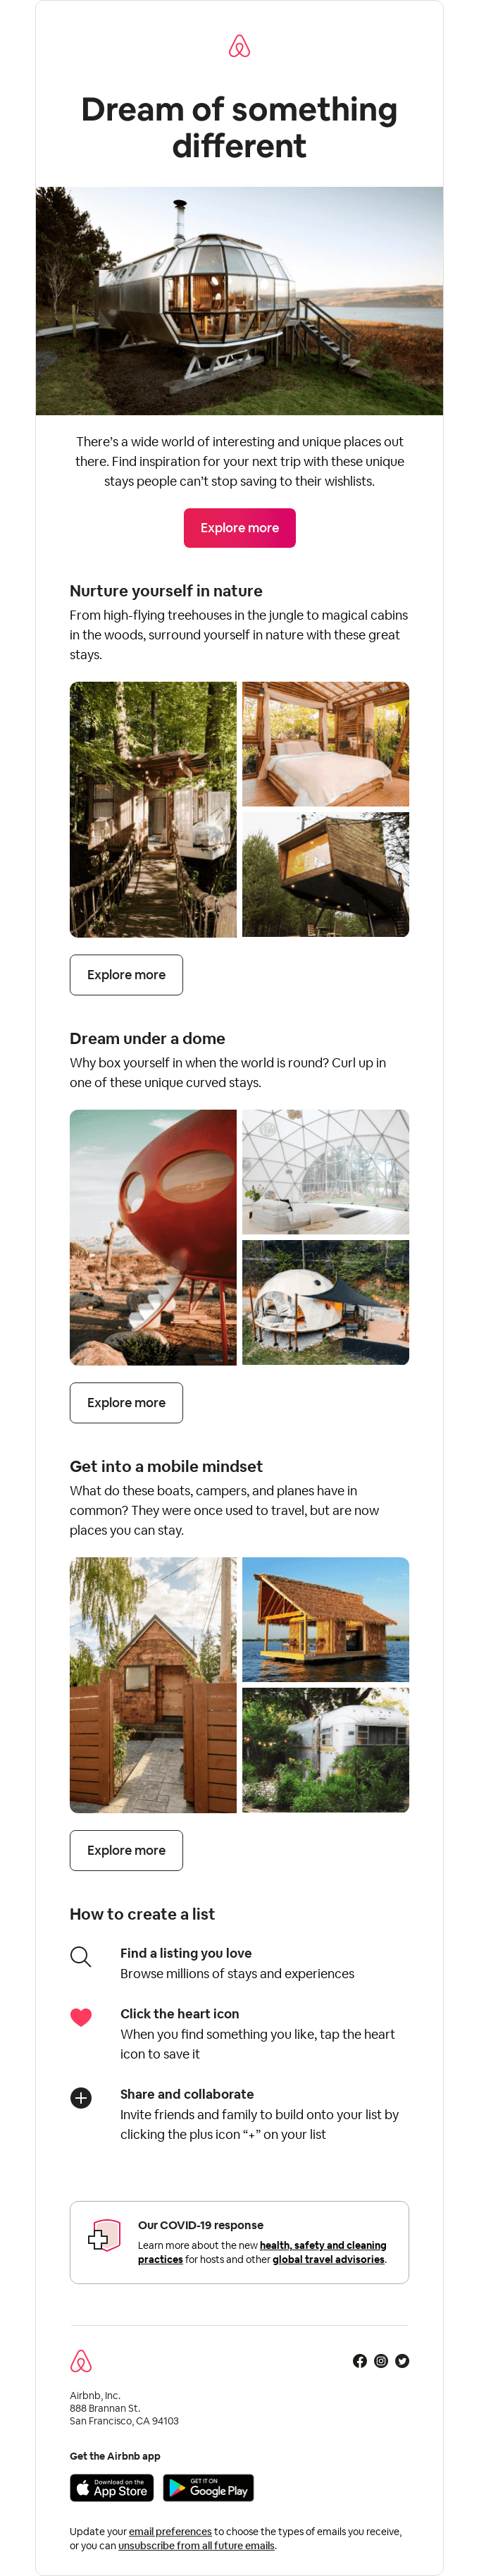 The world’s most unique & wishlisted stays - Airbnb Email Newsletter